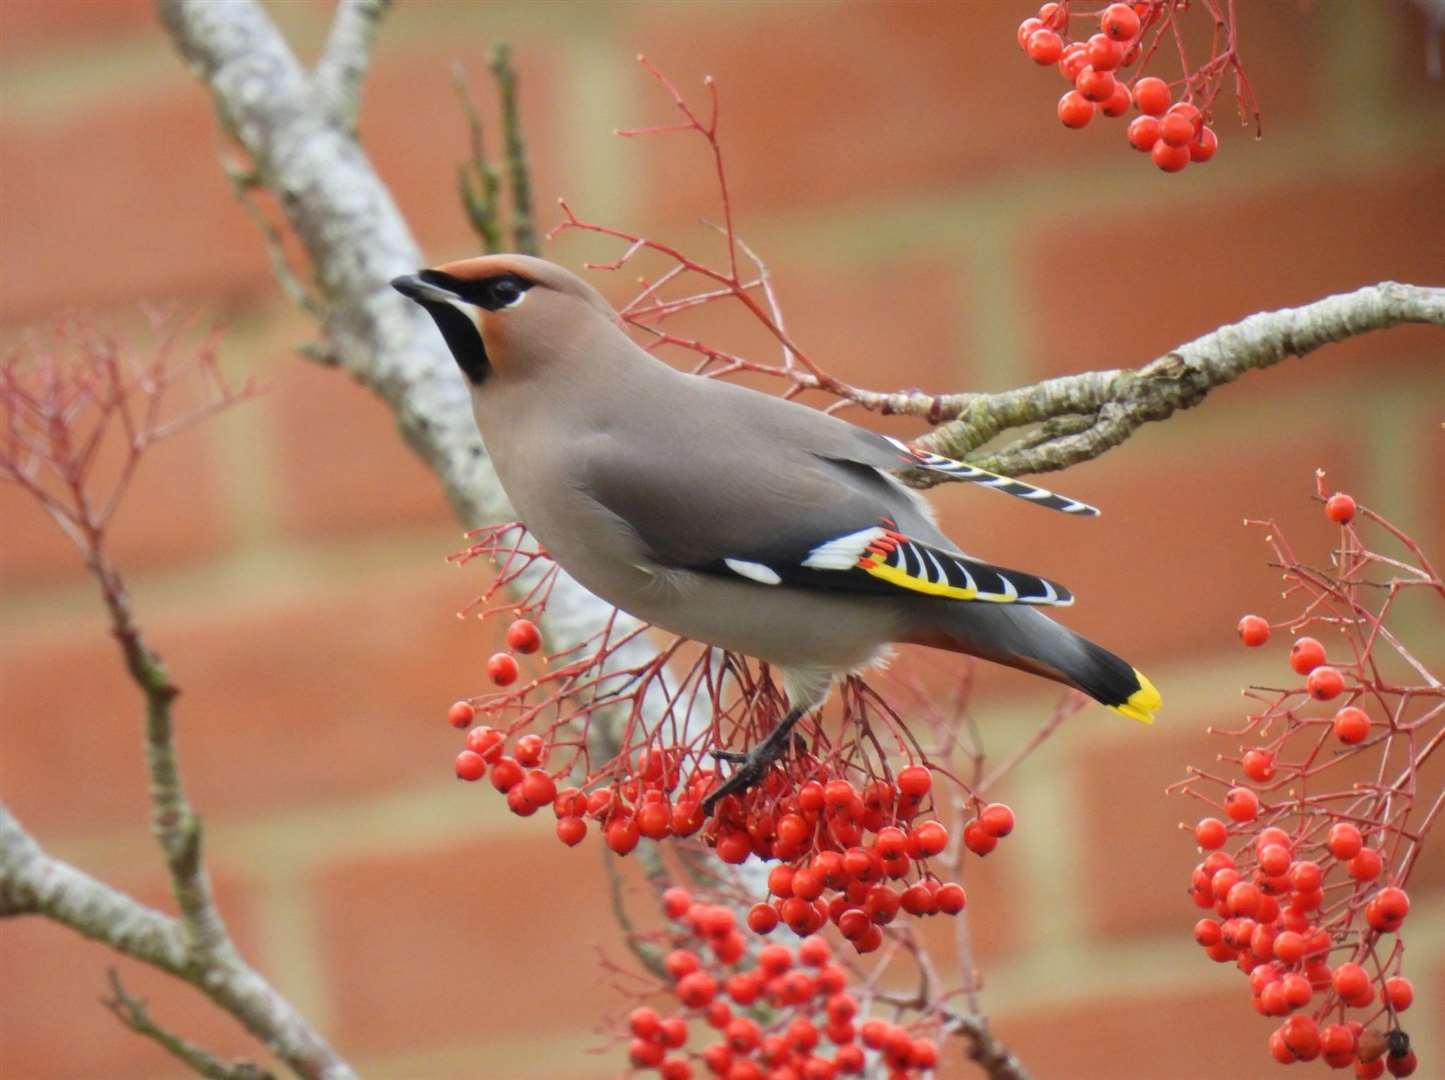 The waxwing is a colourful winter visitor. Photo Tim Ballard